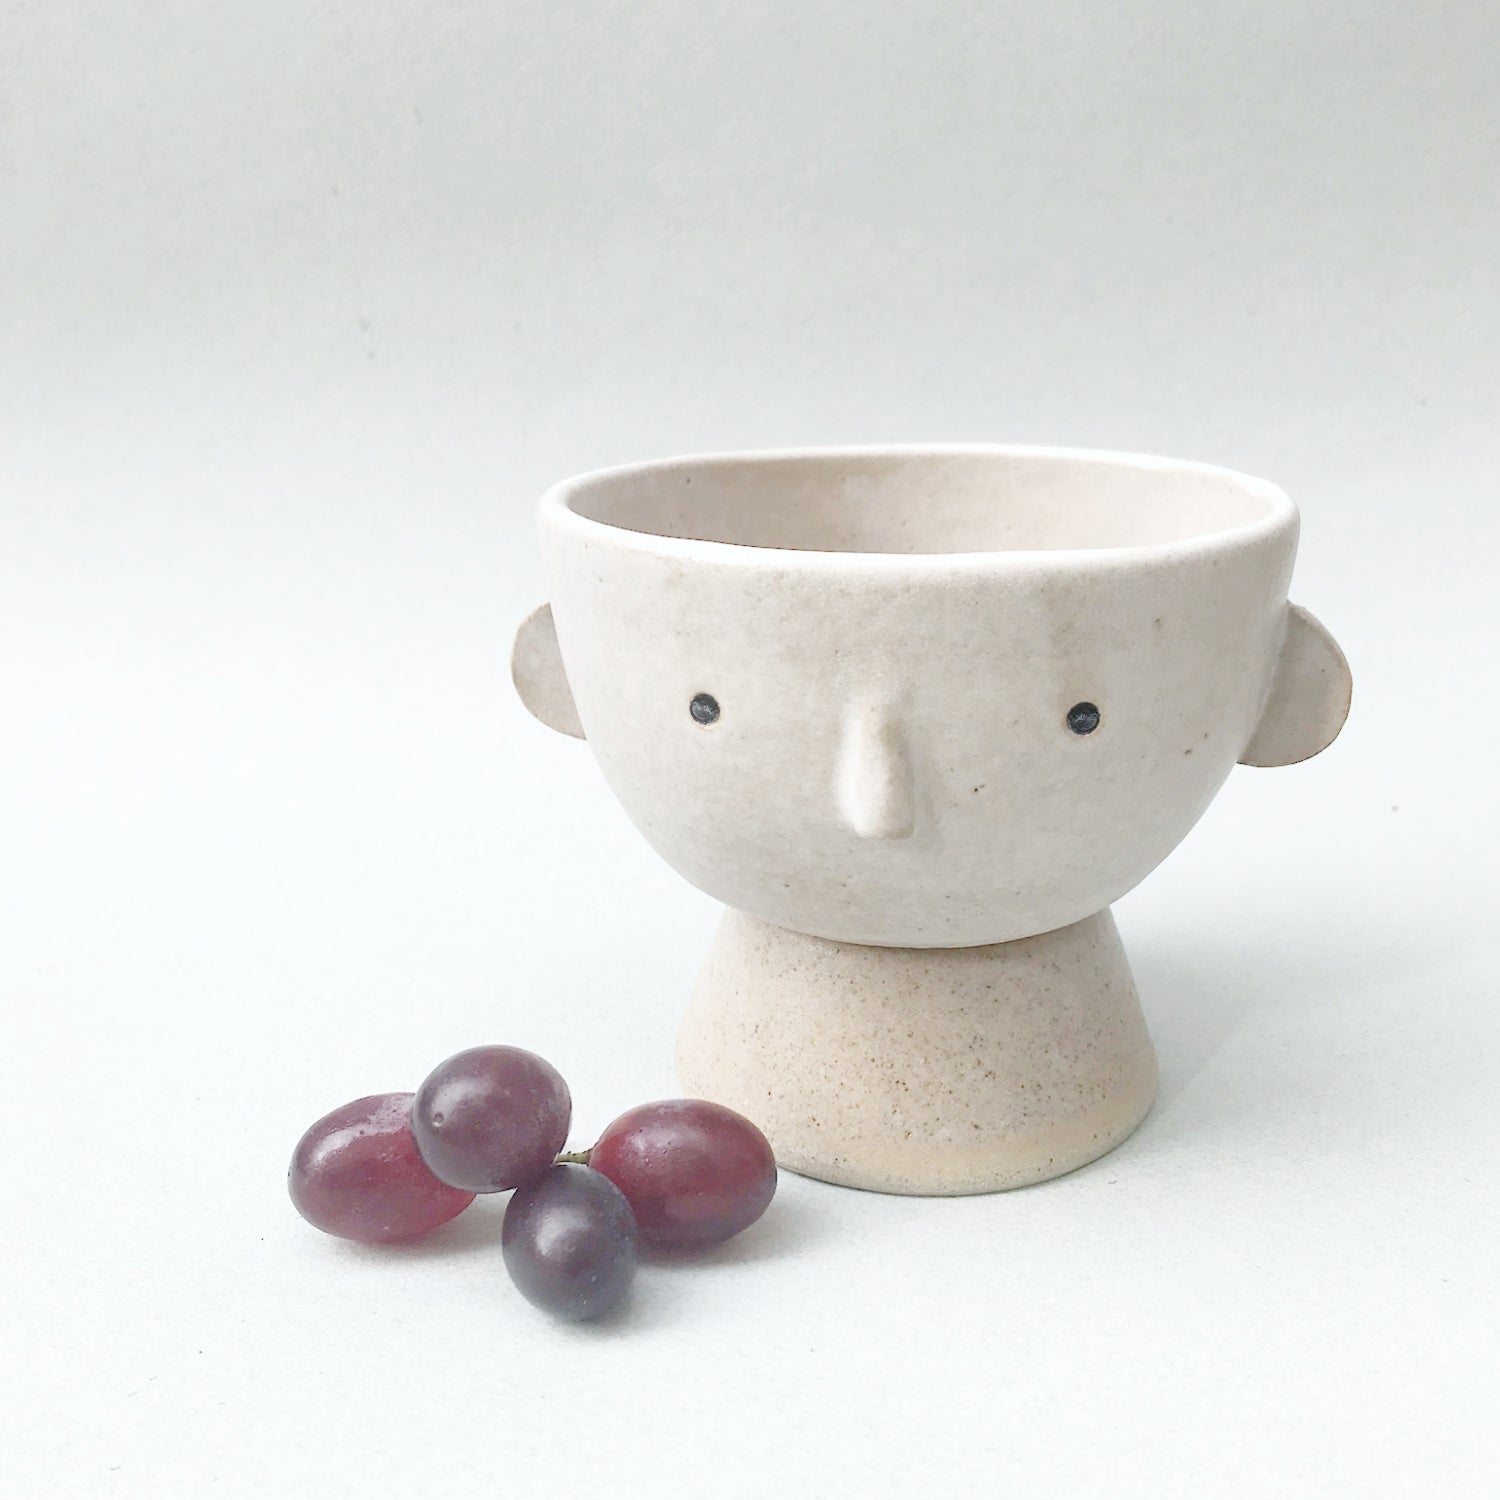 The Very Less Small Berry Bowl (2 parts)